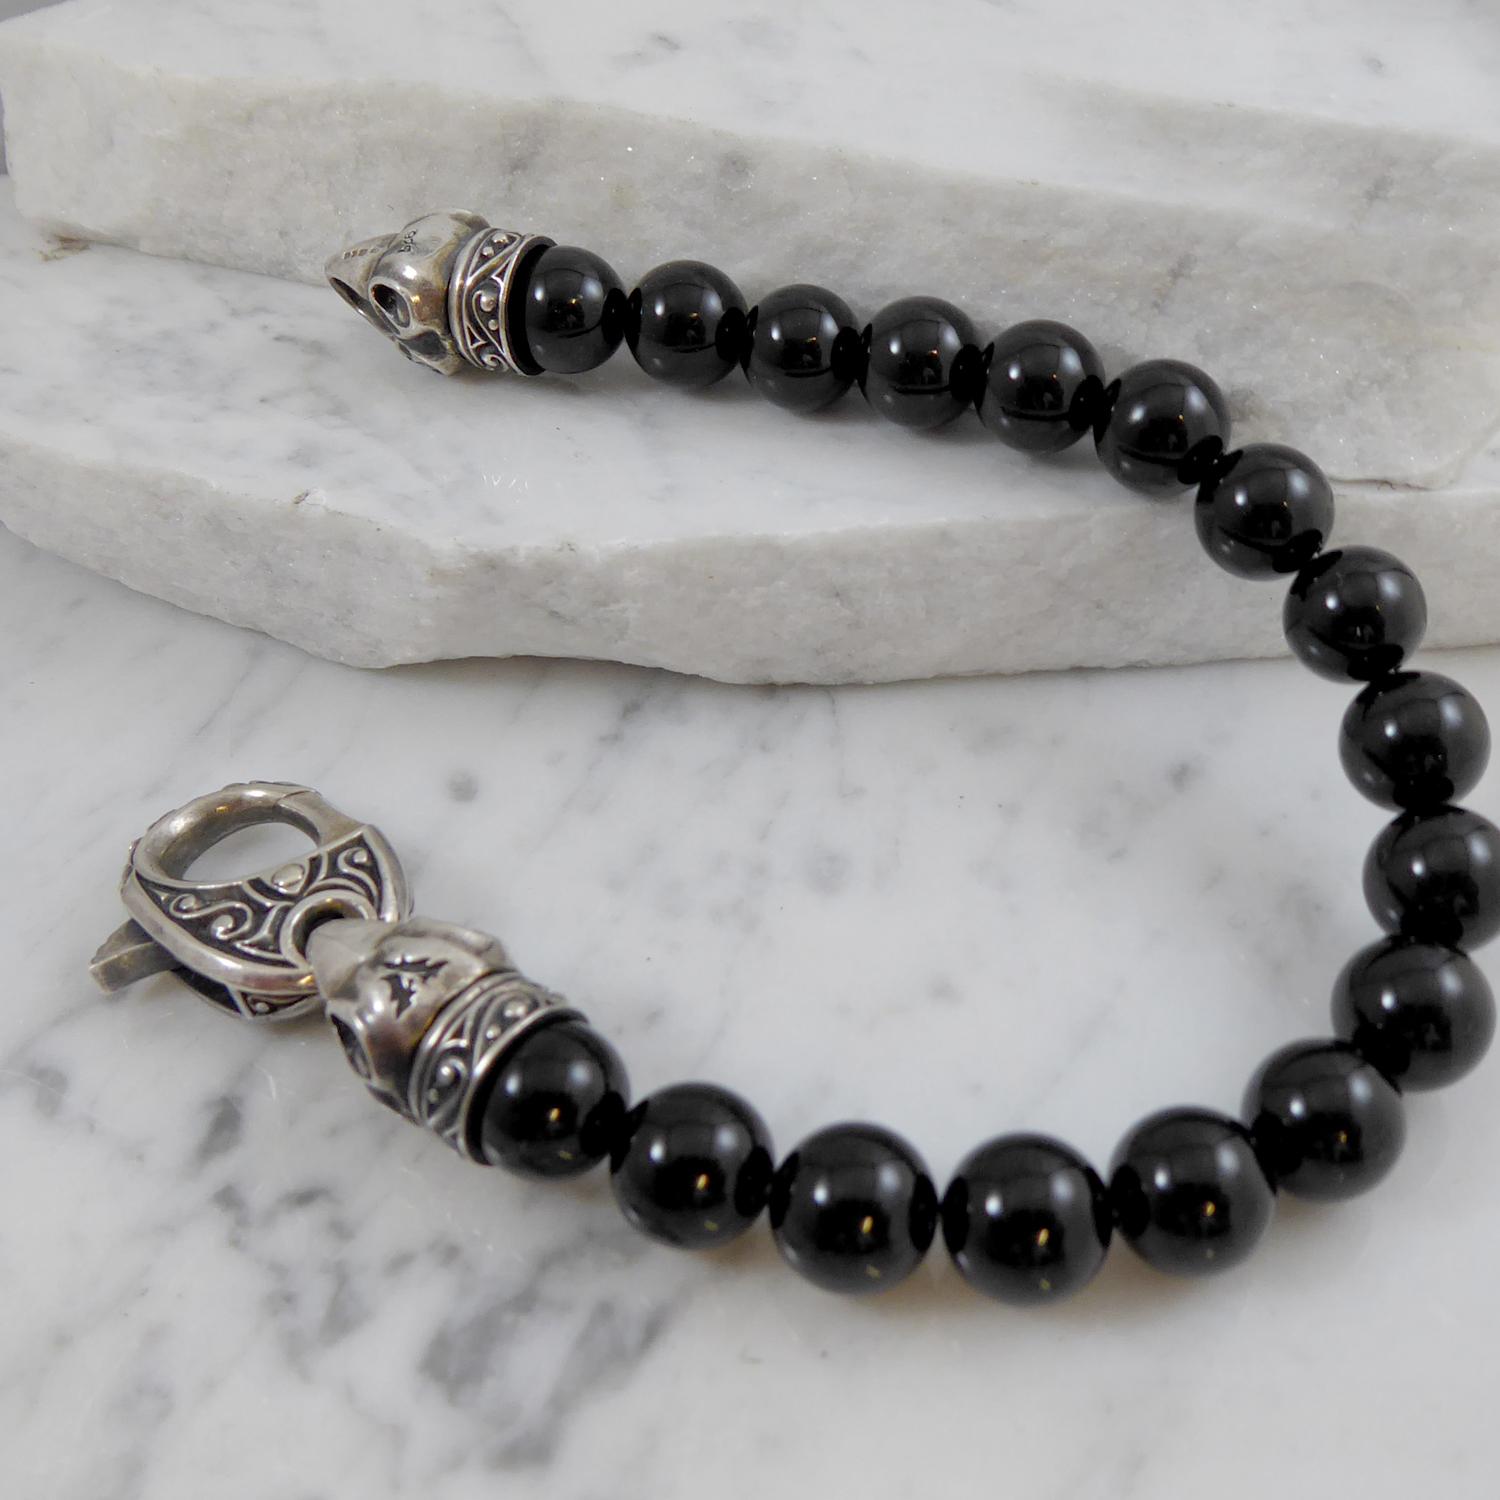 Round Cut Contemporary Onyx Bead and Silver Bracelet, Raven Head Catch